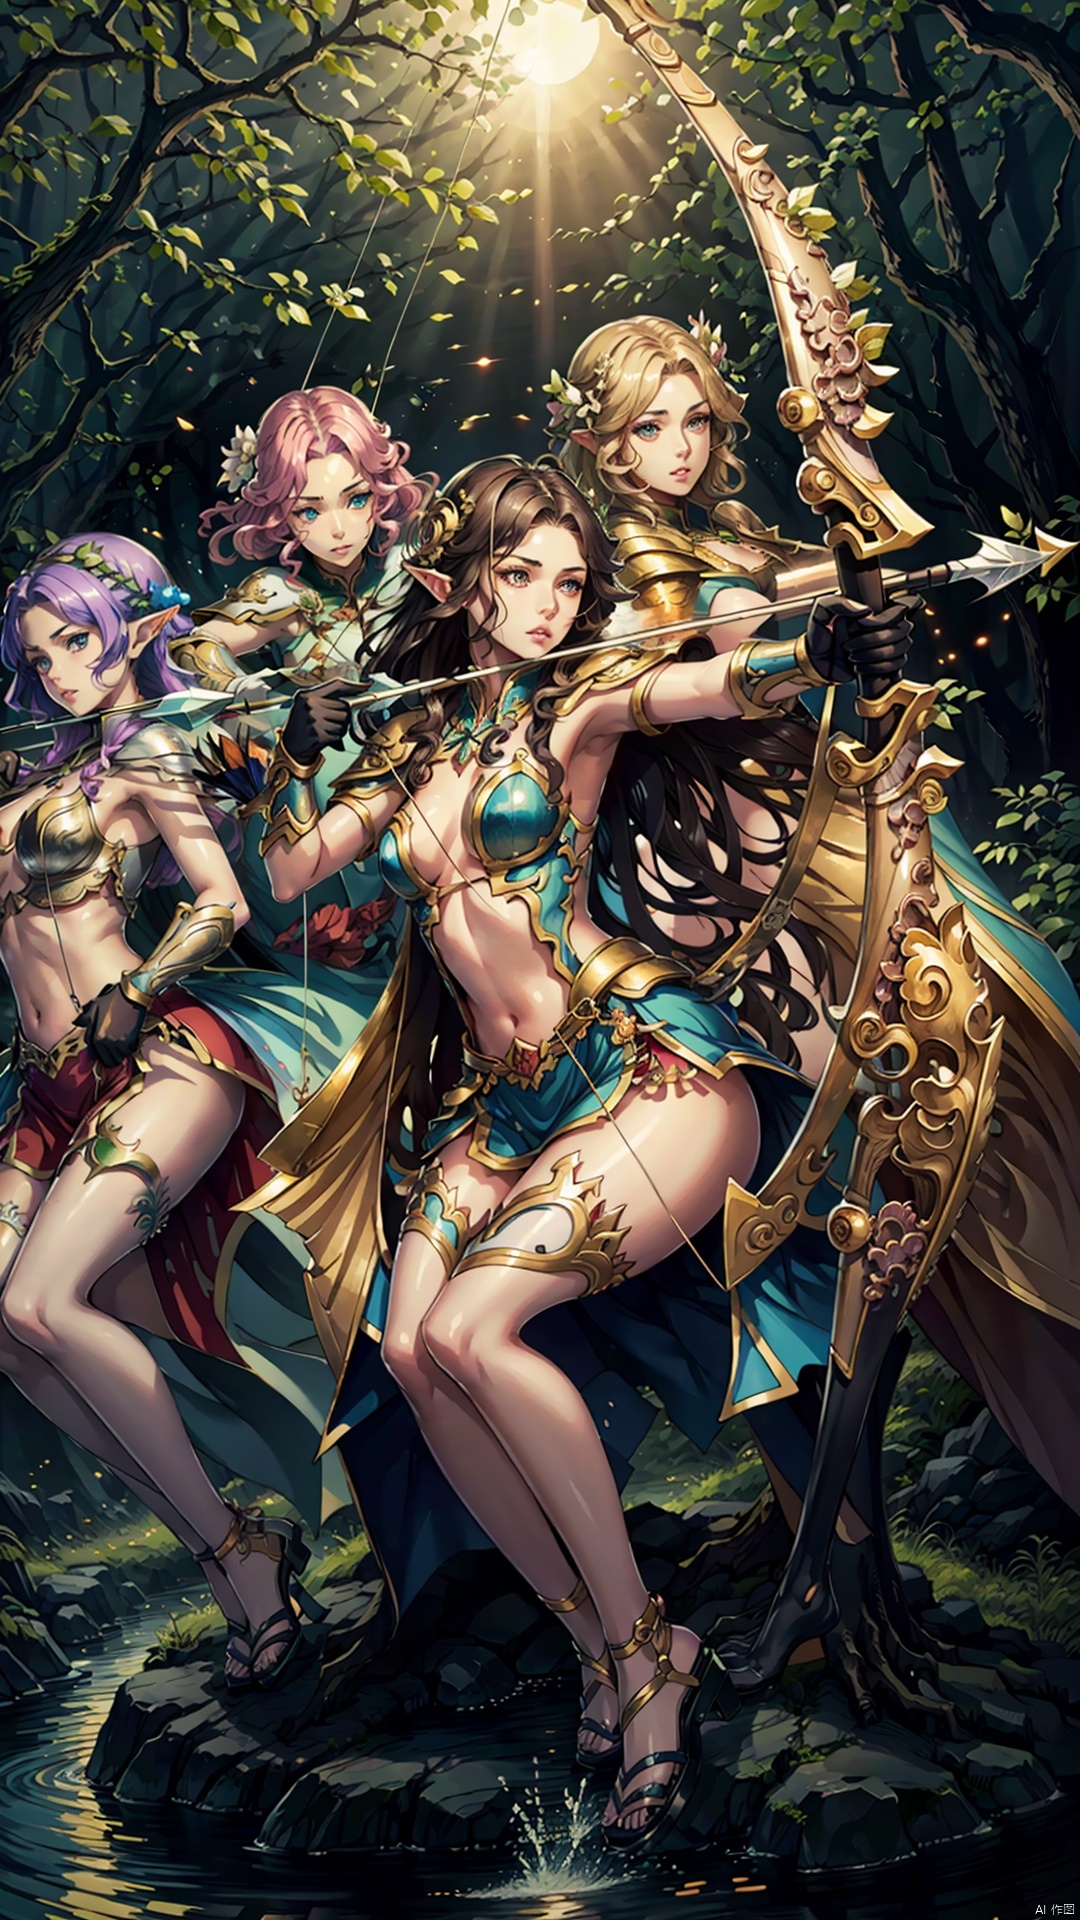  Masterpiece, Best quality,8K,

3 girls,drawing bow,(3 girls Shoot arrows:1.3),(girls:archers,bow in hand,drawing bow:1.2), 

(girls:female elf,Nine heads,small waists,full bodies,sexy bodies,delicate lips,beautiful eyes,beautiful mouth,fair skin,clean face,Delicate features),

(Blue Sky:1),(white clouds:1),large dense forest,the sun passing through the woods,the sky has flying dragon,